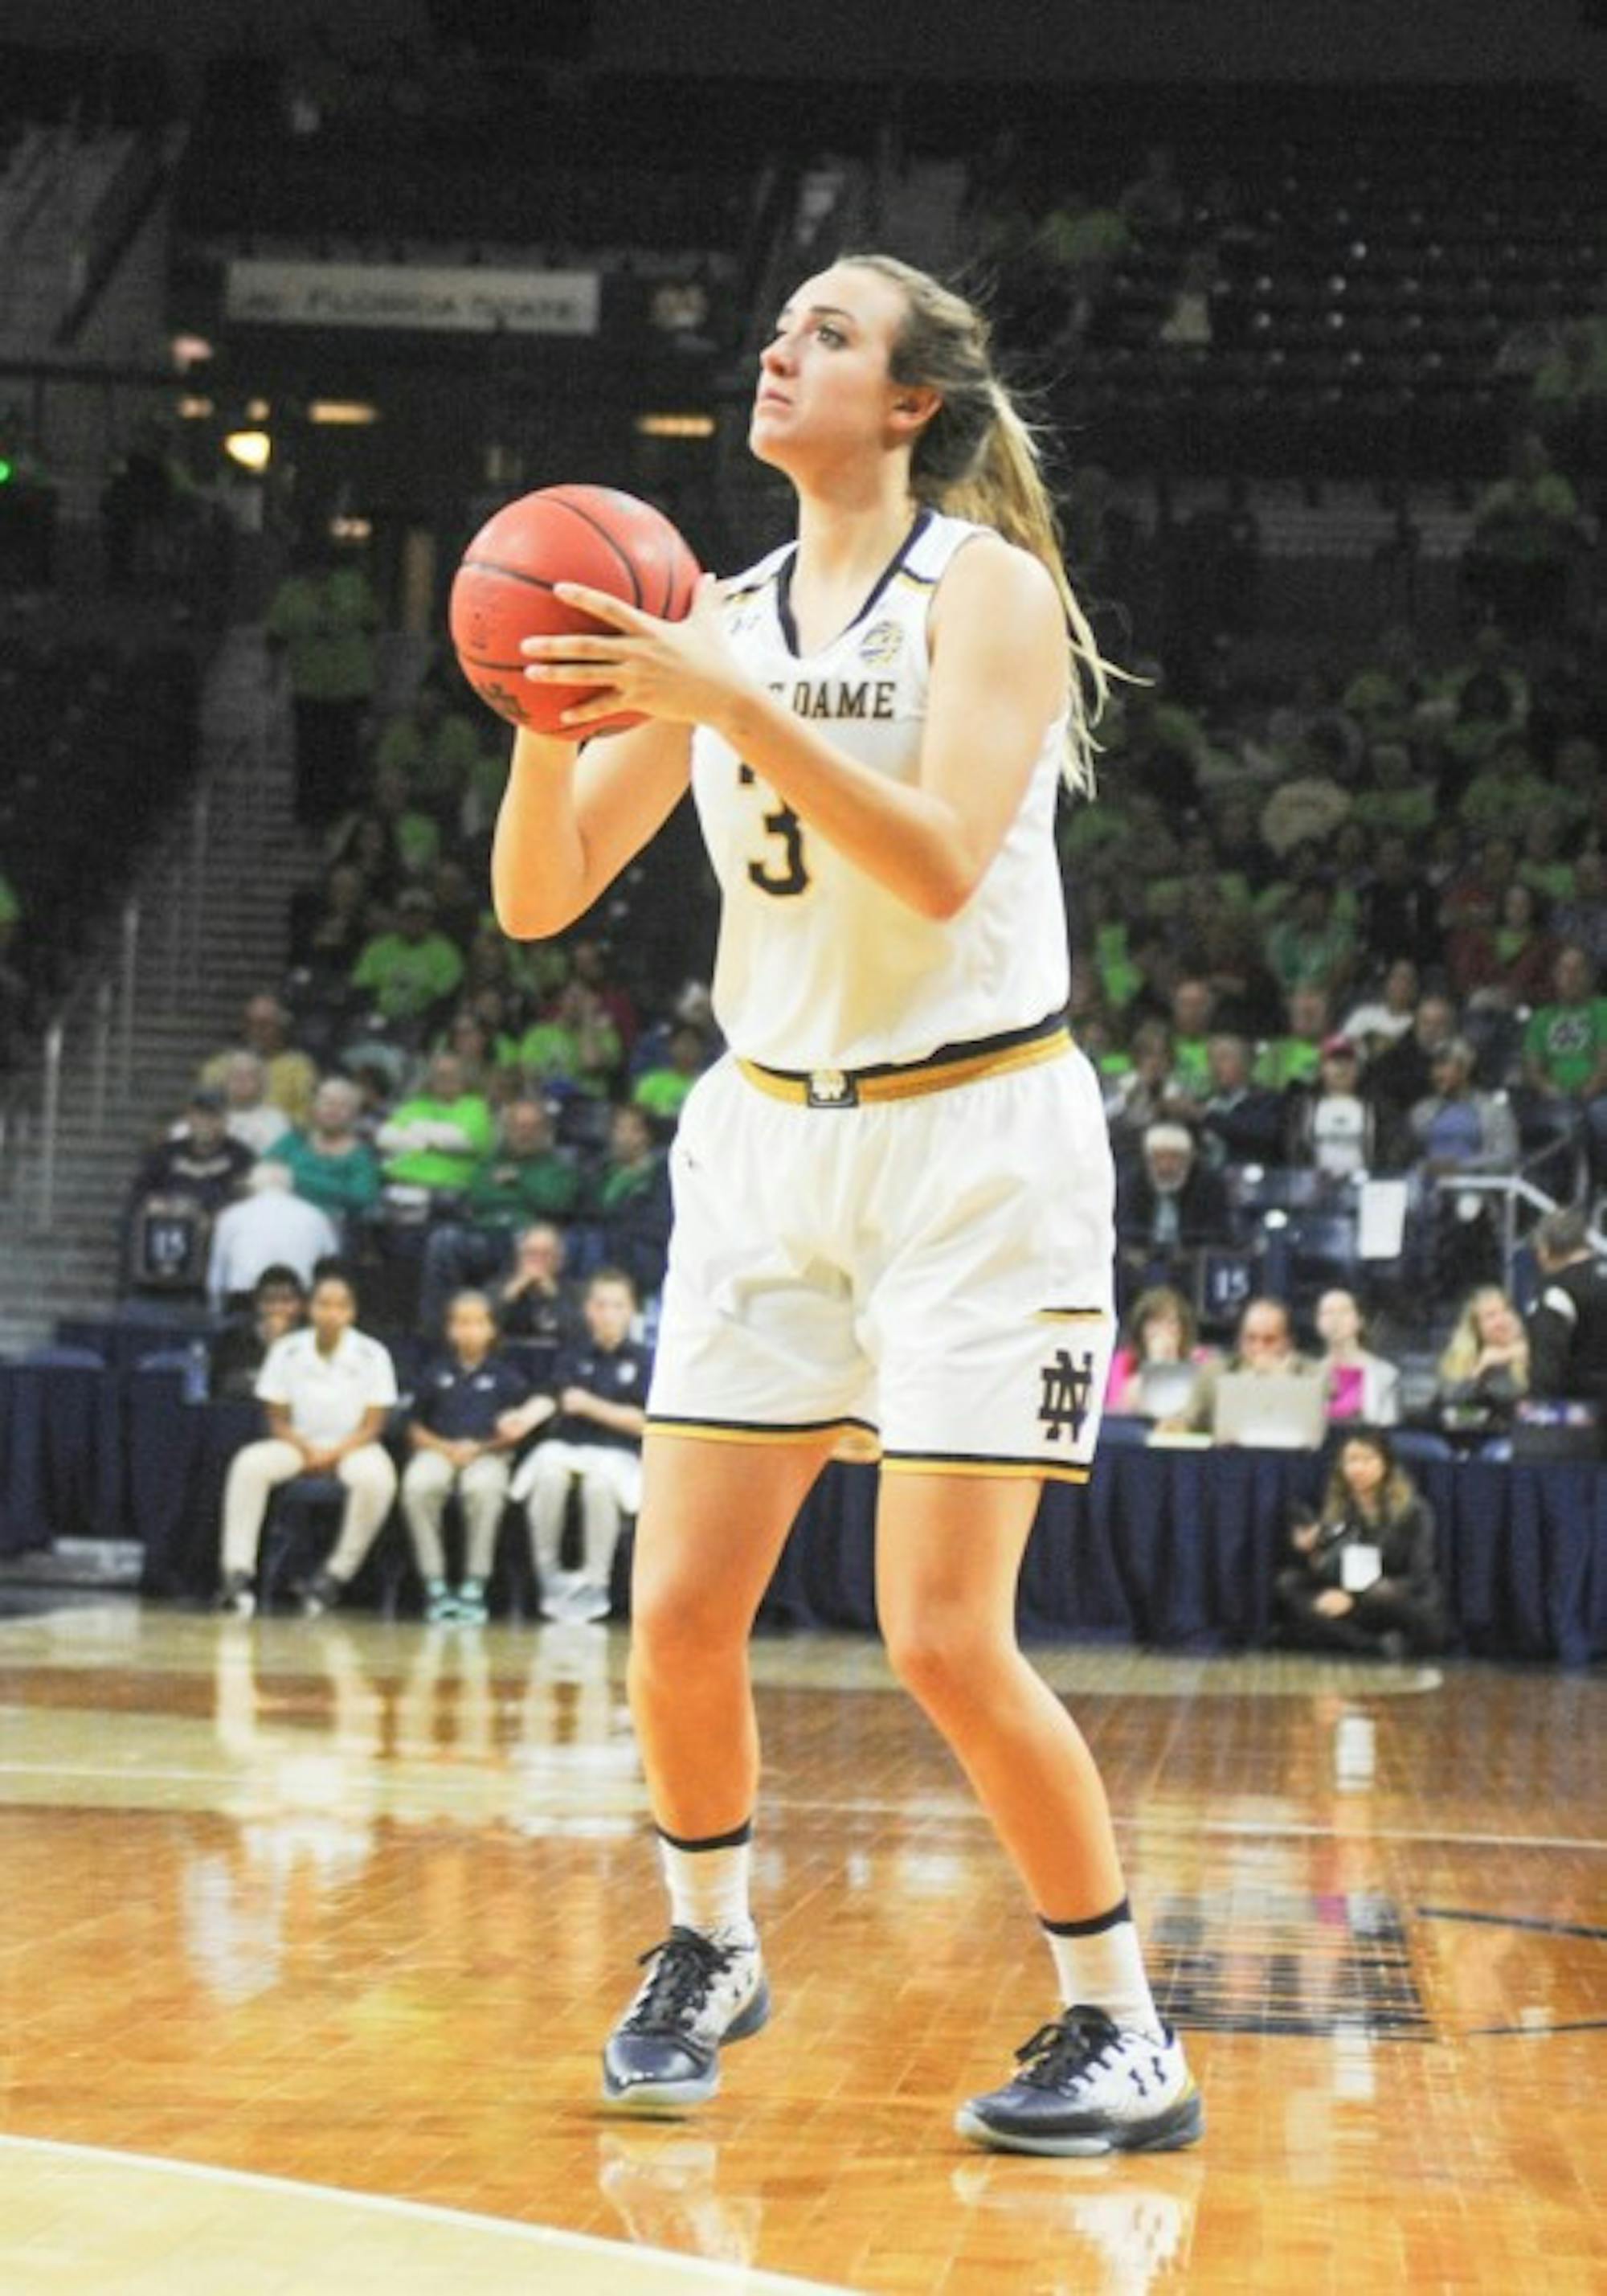 Sophomore guard Marina Mabrey loads up for a shot during Notre Dame’s 67-36 victory over Fordham on Nov. 14 at Purcell Pavilion.